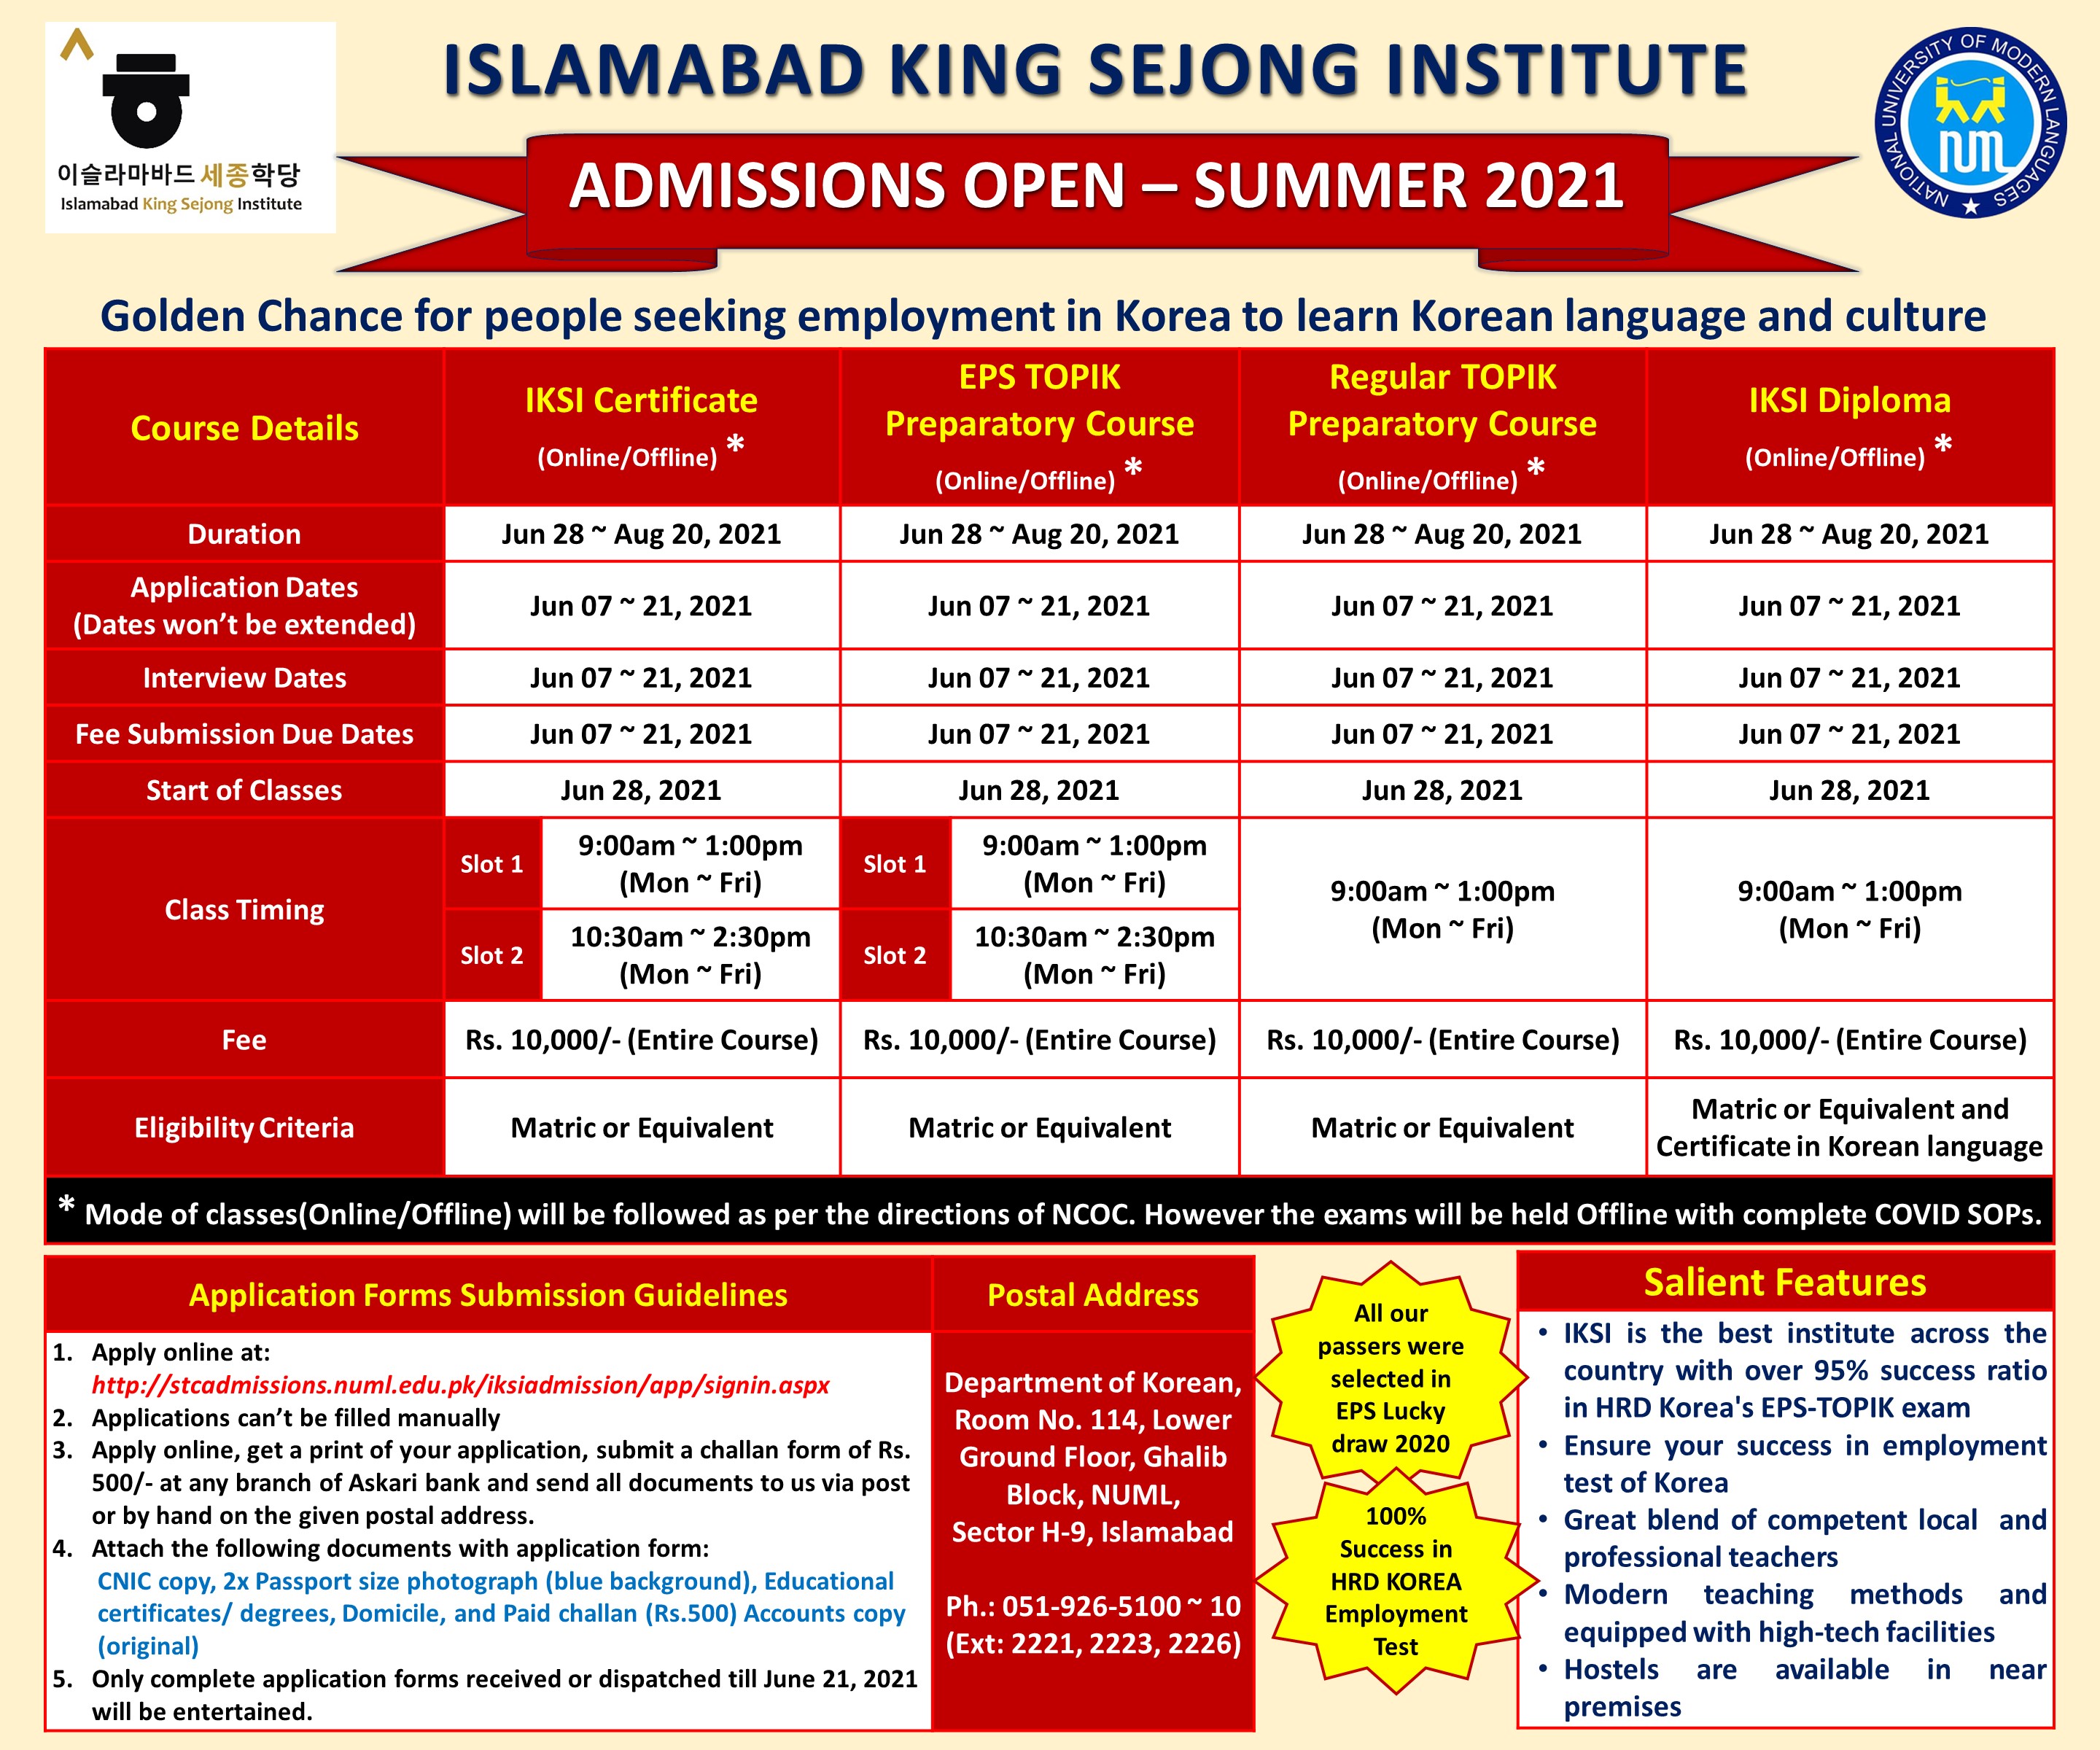 ISLAMABAD KING SEJONG INSTITUTE - SUMMER 2021 ADMISSION OPEN